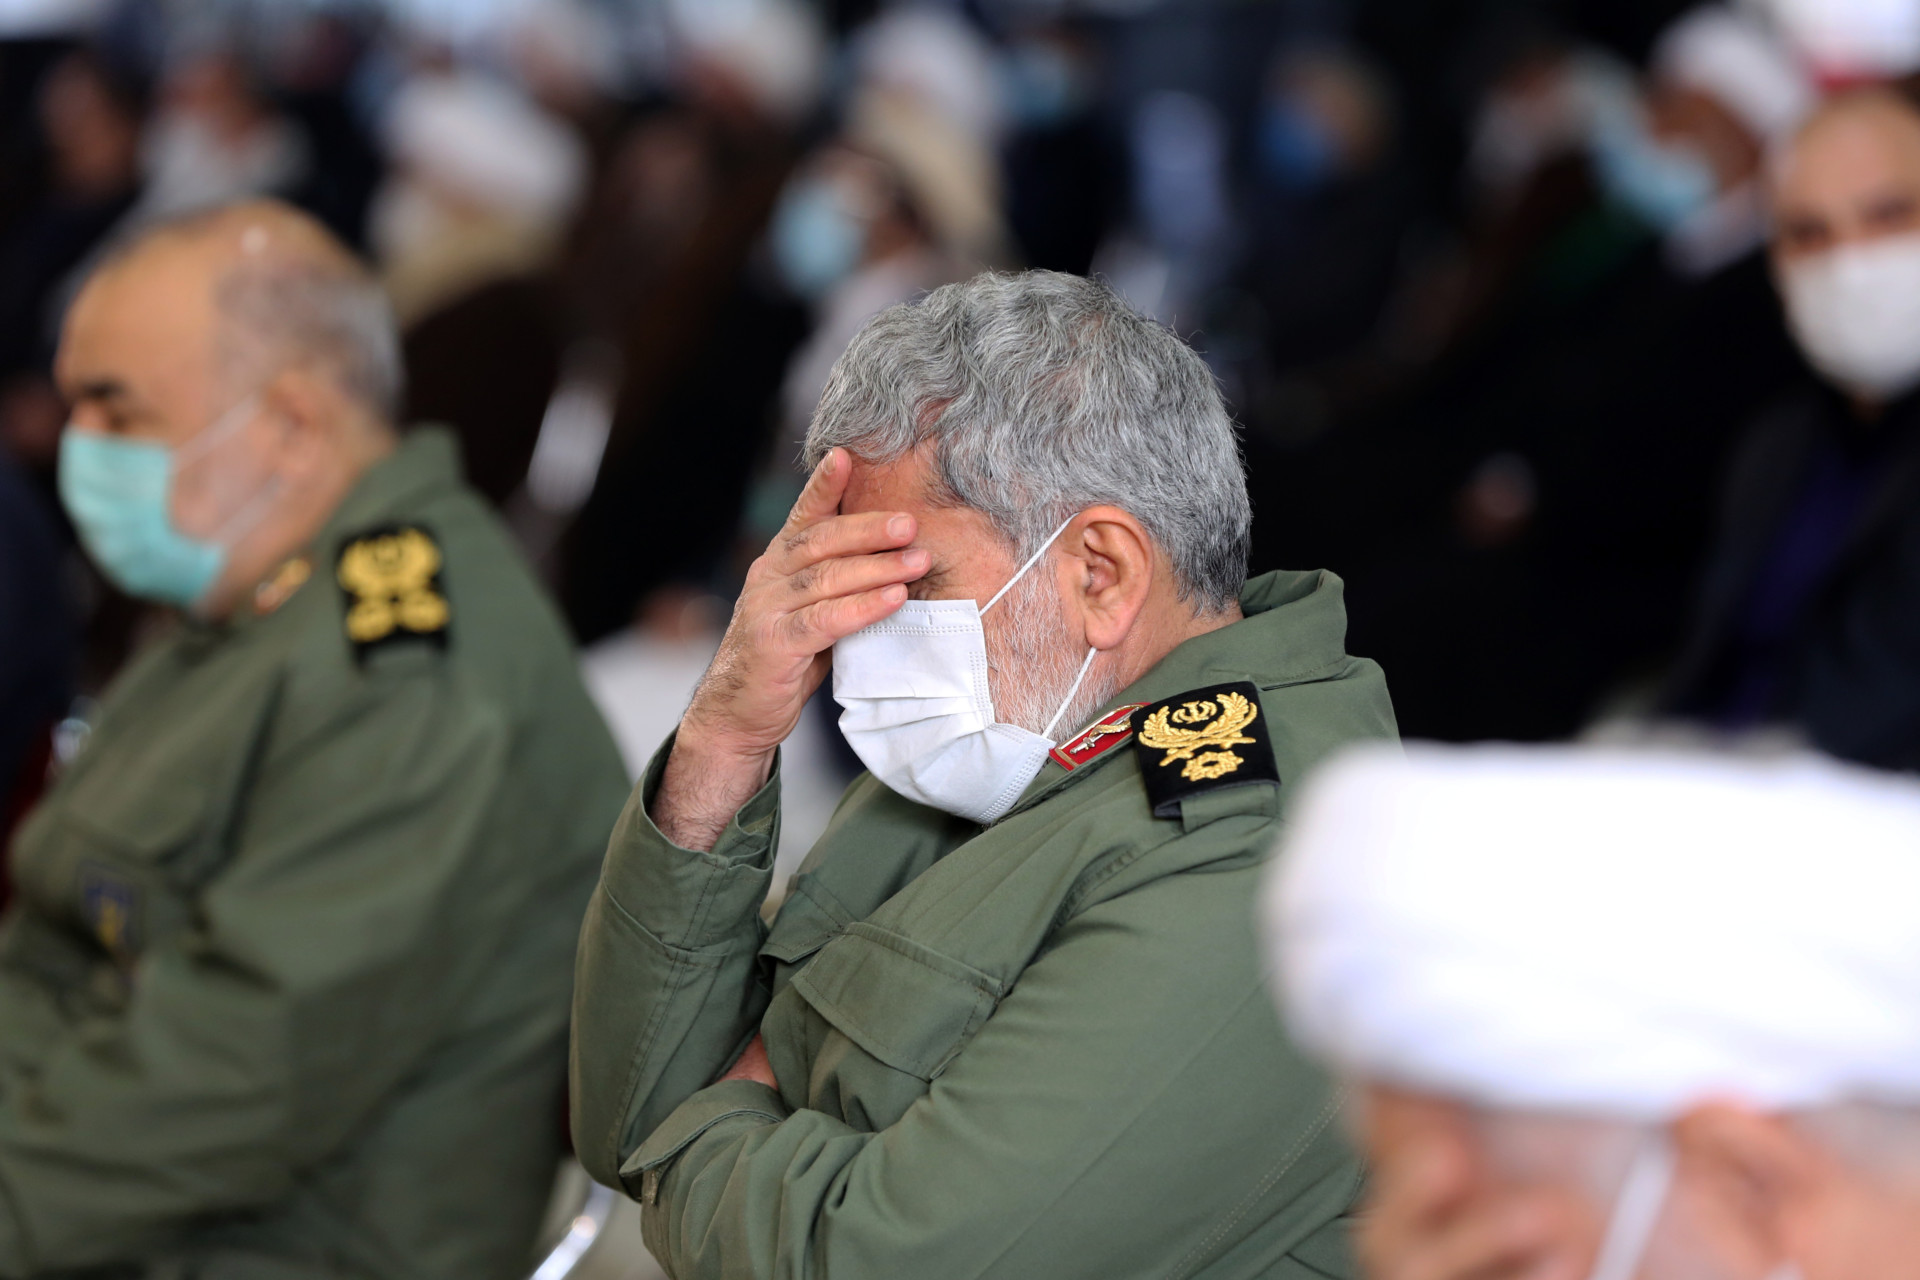 Iran Struggles to Fill the Vacuum Left by Soleimani